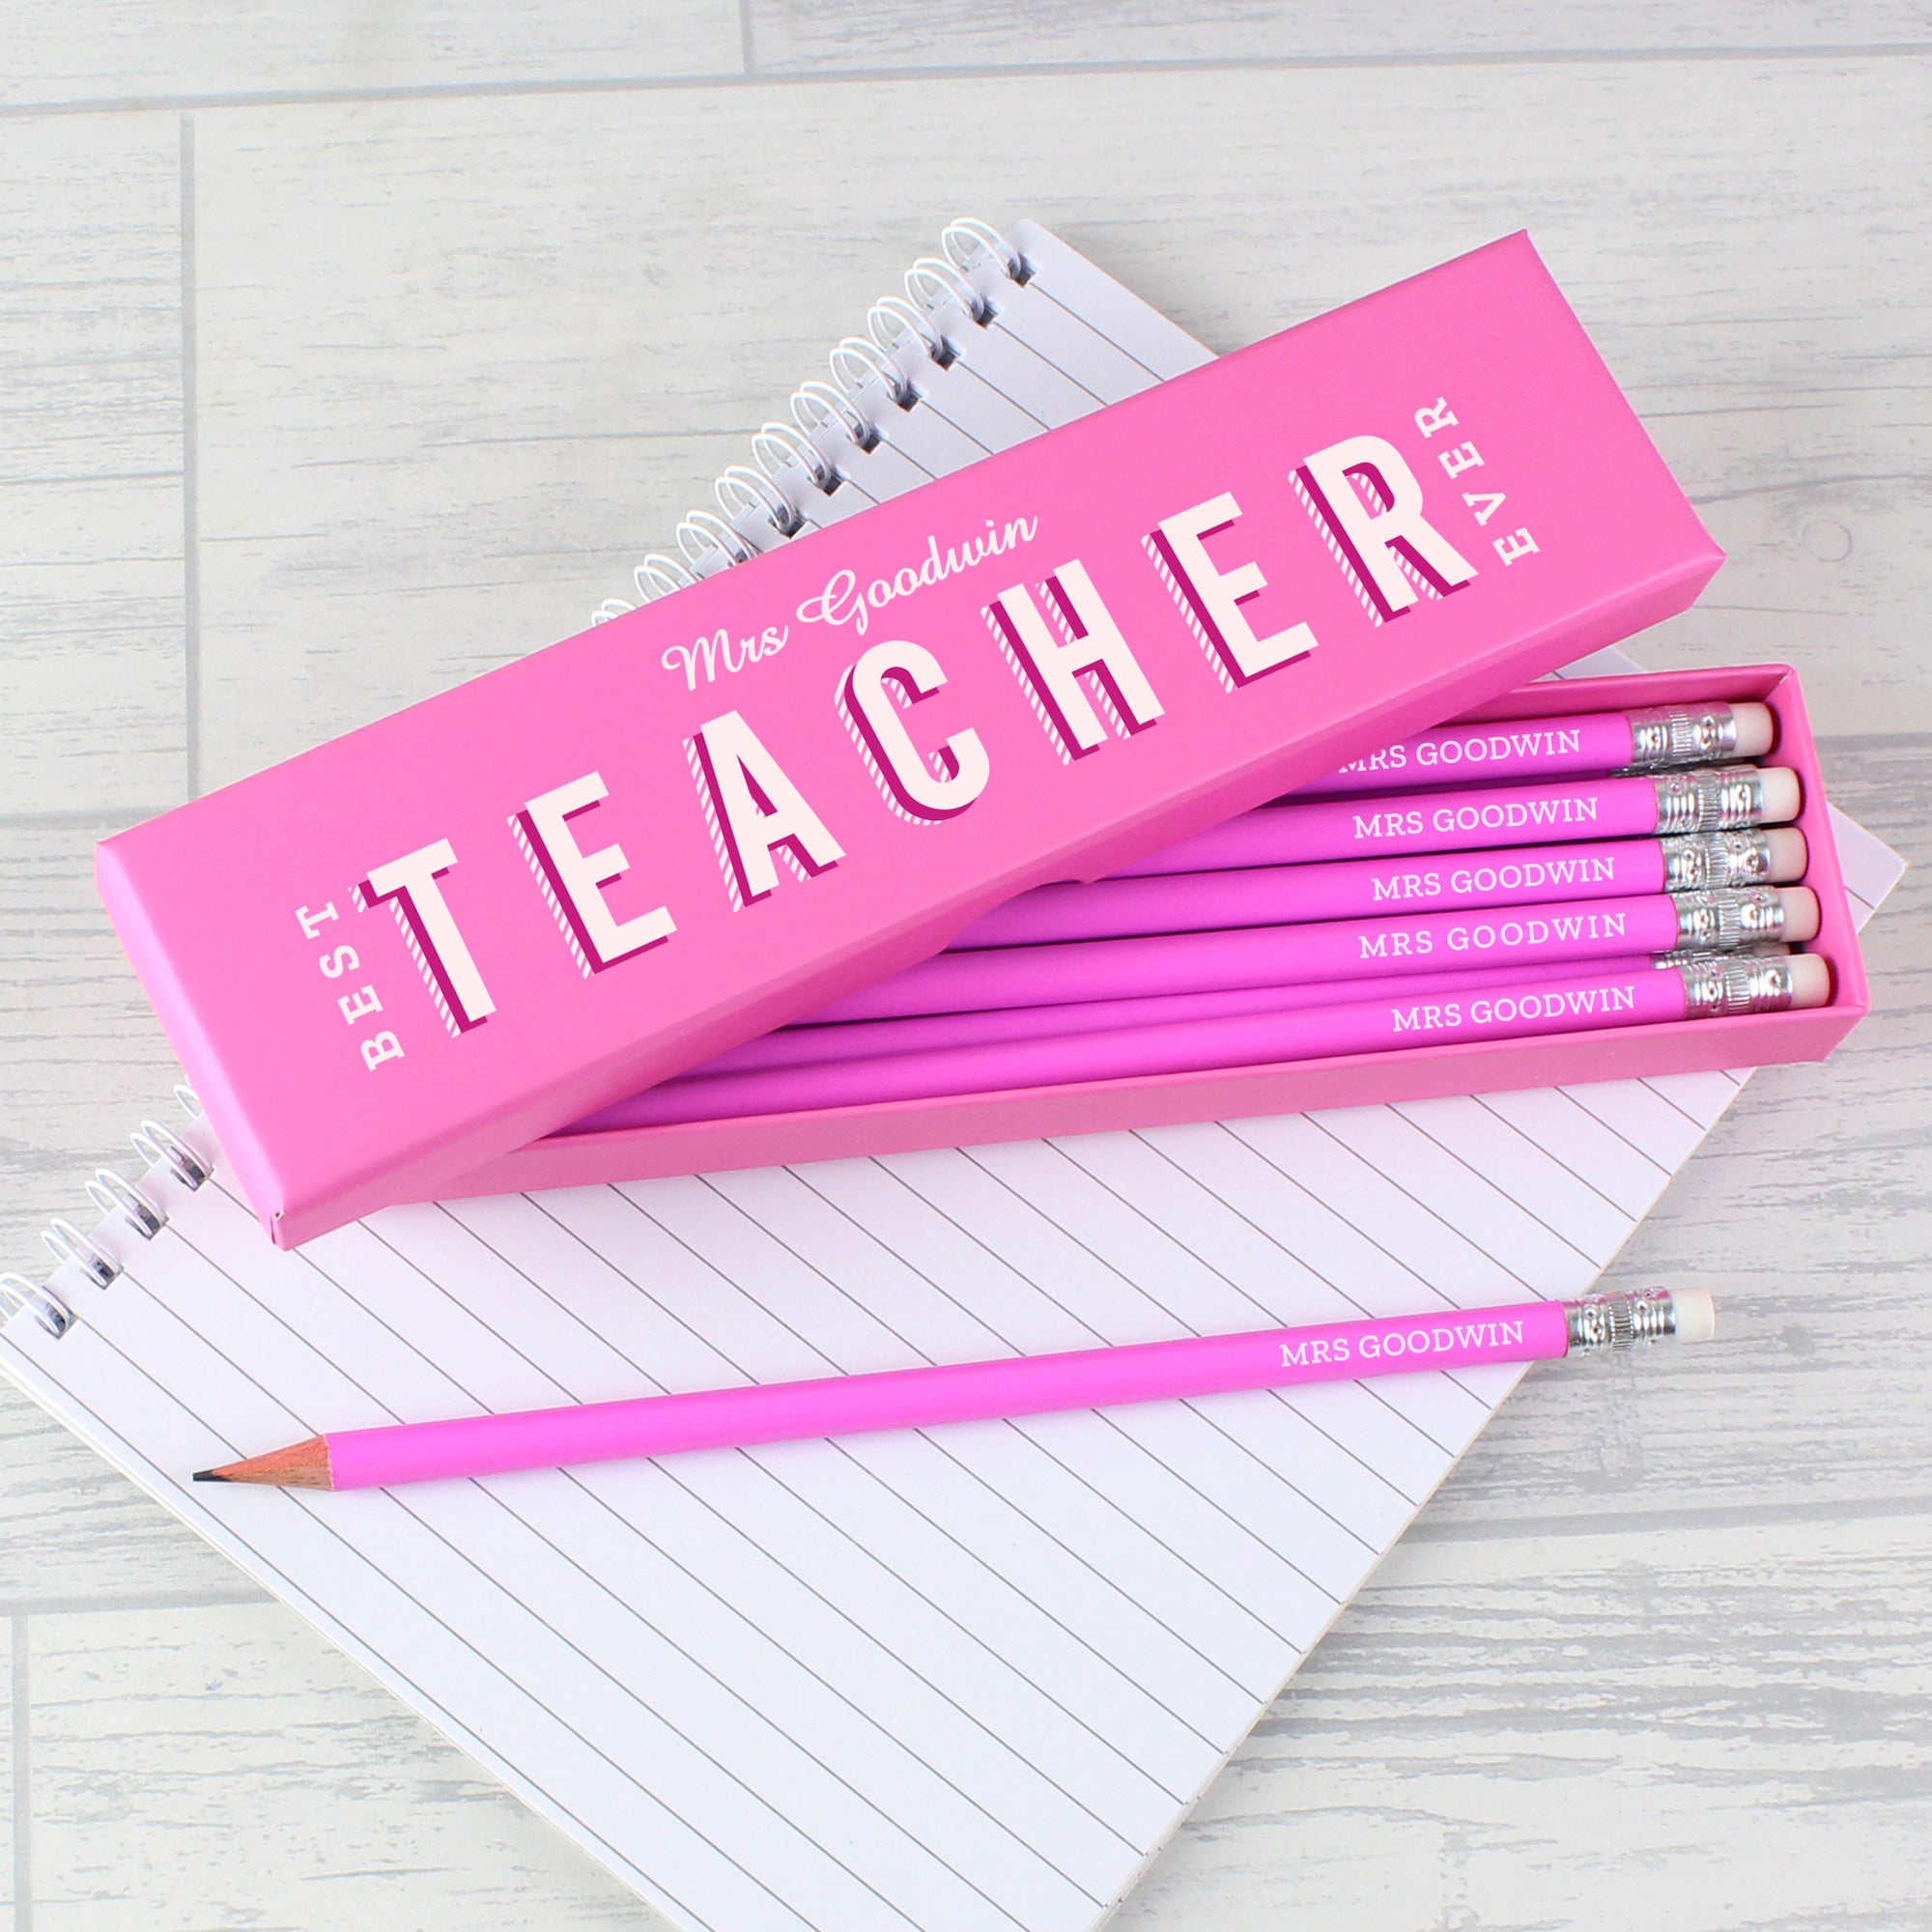 Image of a personalised box containing 12 personalised pencils. The box is pink and can be personalised with a teacher’s name which will be followed by the fixed text of Best Teacher Ever which is printed in white modern uppercase letters. Inside the box has 12 HB pencils with a pink outer and a small eraser at the end. Each pencil will also be personalised with the teacher’s name in white uppercase letters.